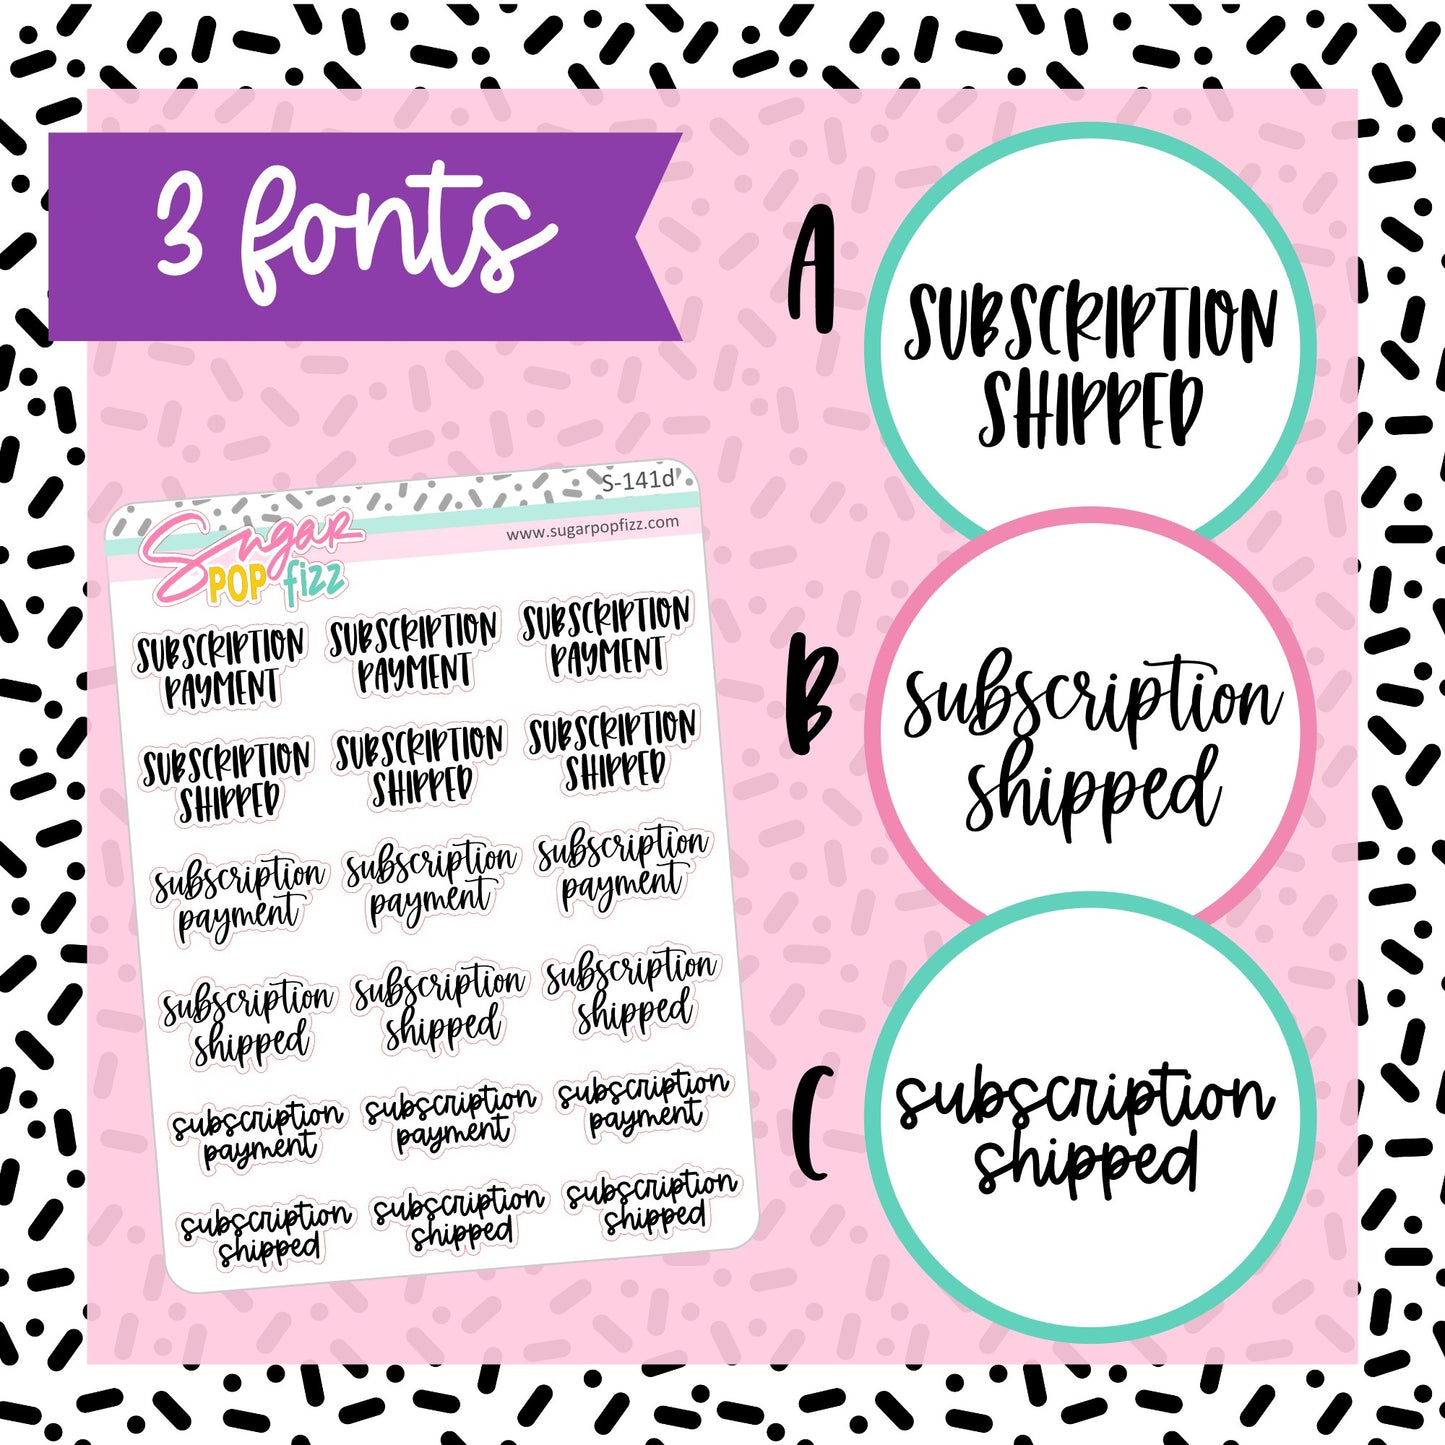 Subscription Payment/Shipped Script Stickers - S141